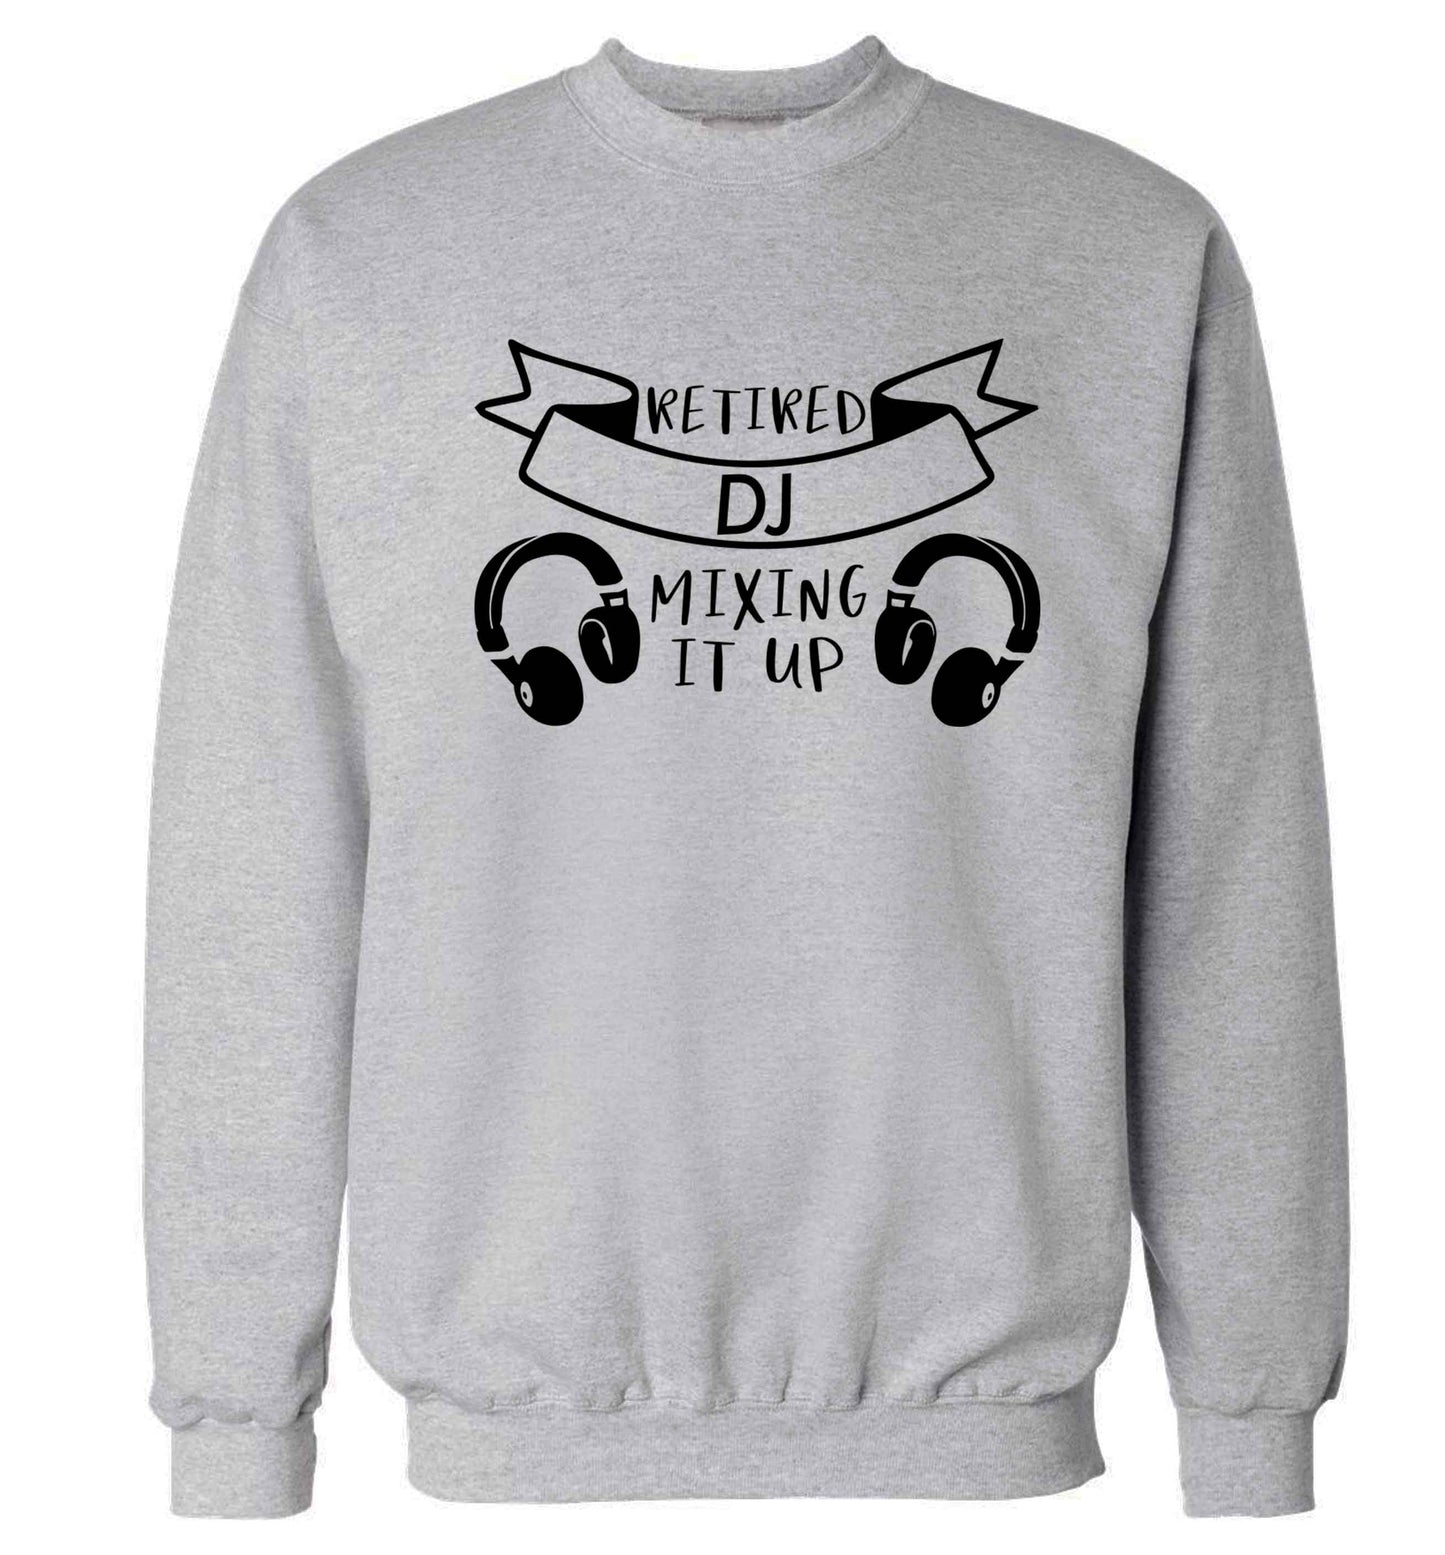 Retired DJ mixing it up Adult's unisex grey Sweater 2XL